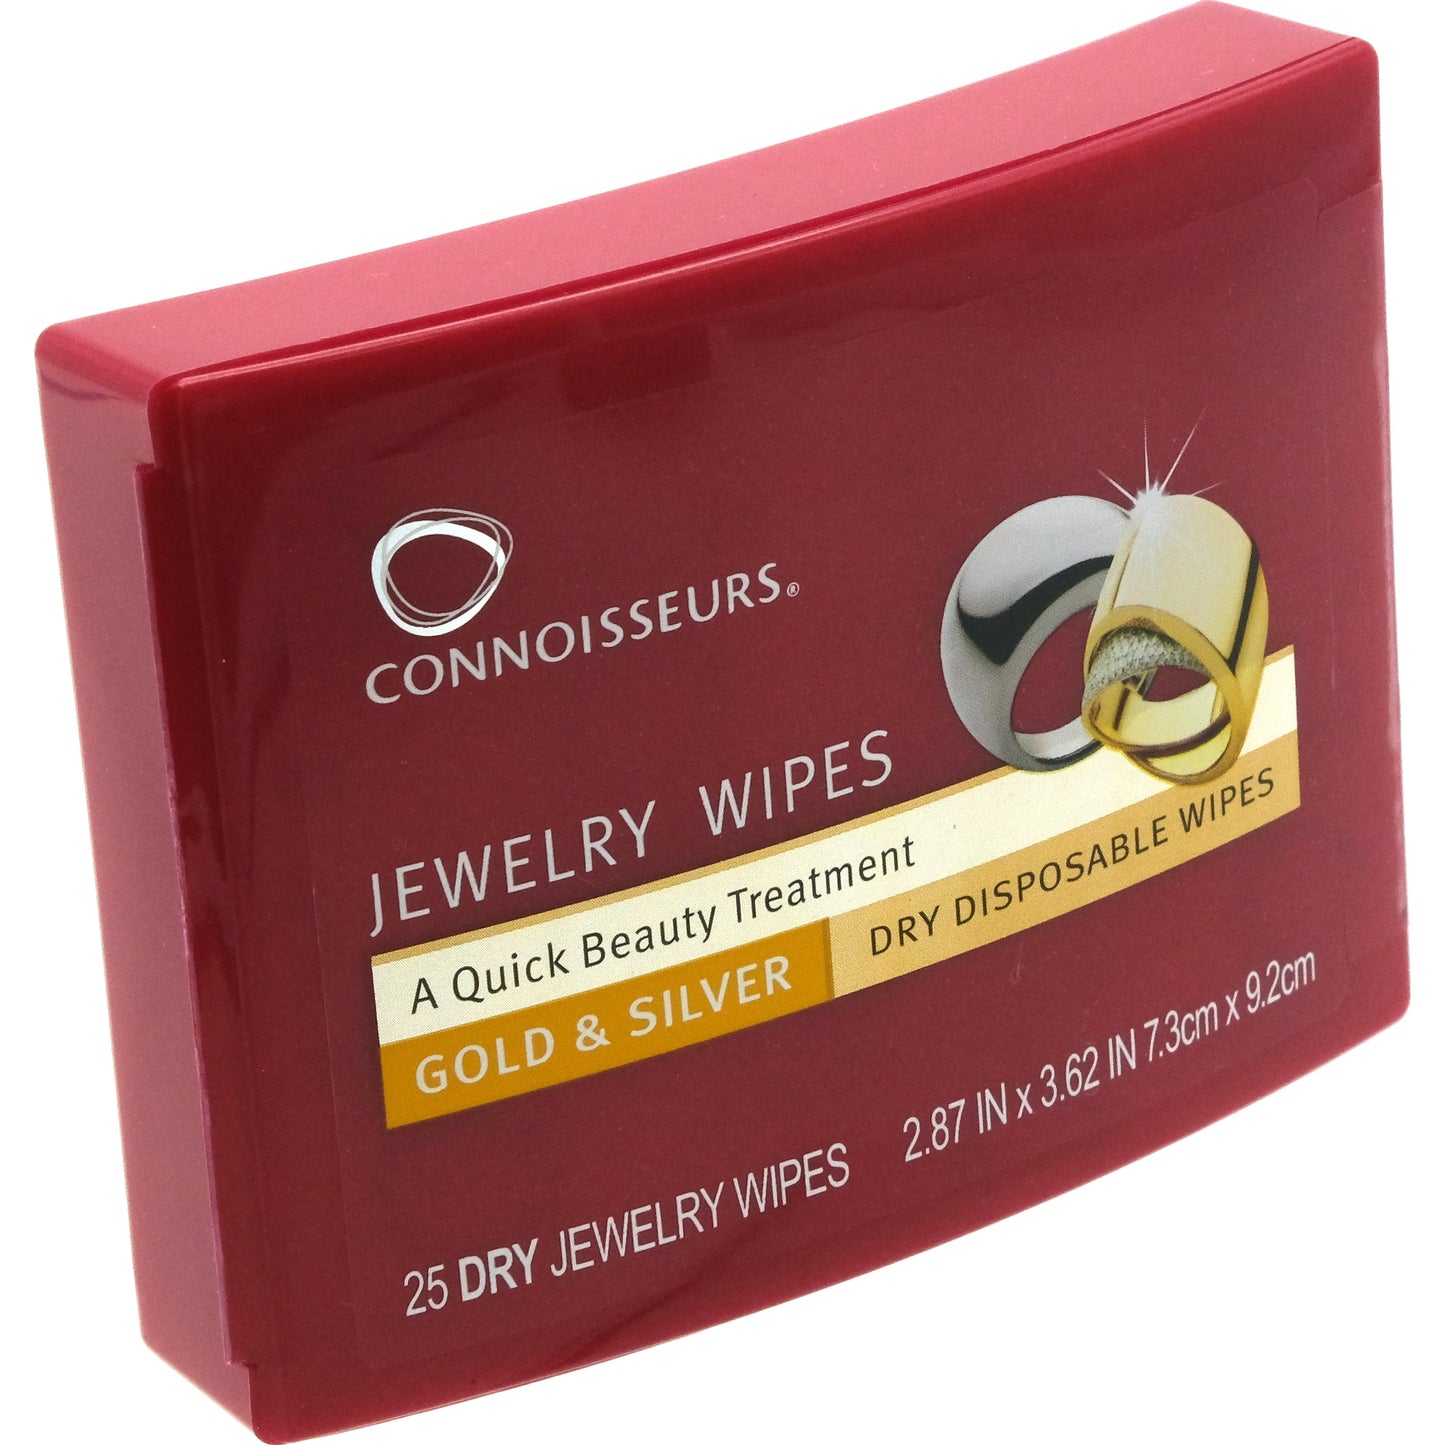 Connoisseurs Jewelry Wipes 25 Wipes